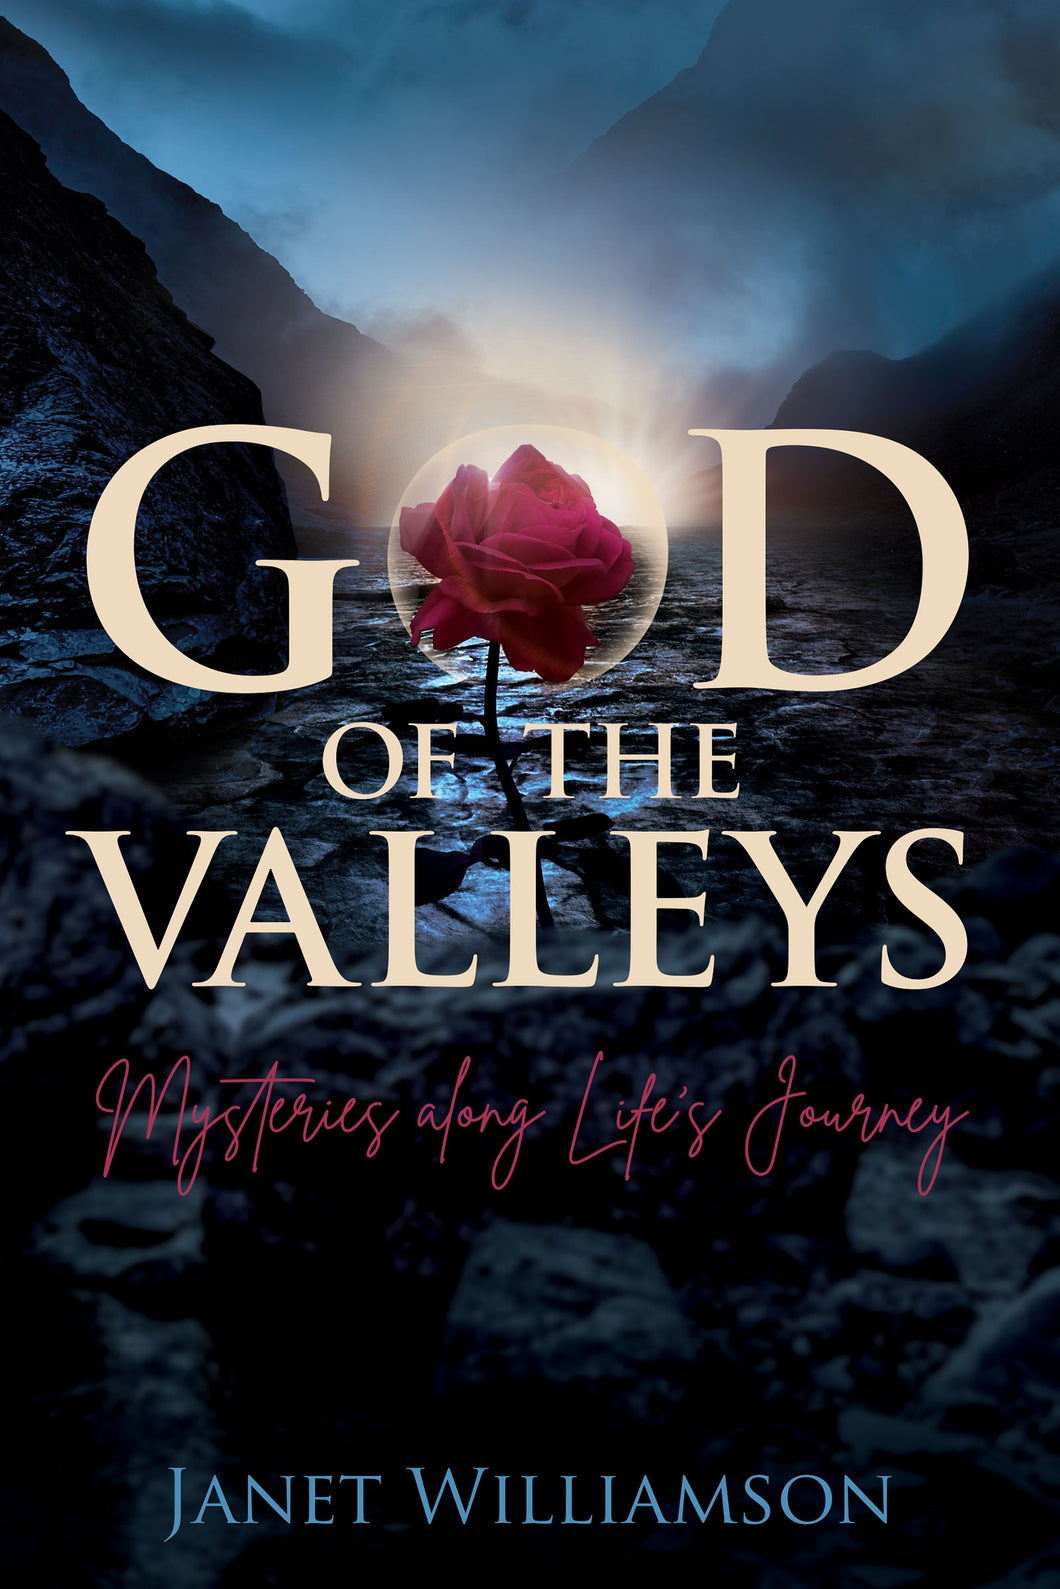 God of the Valleys